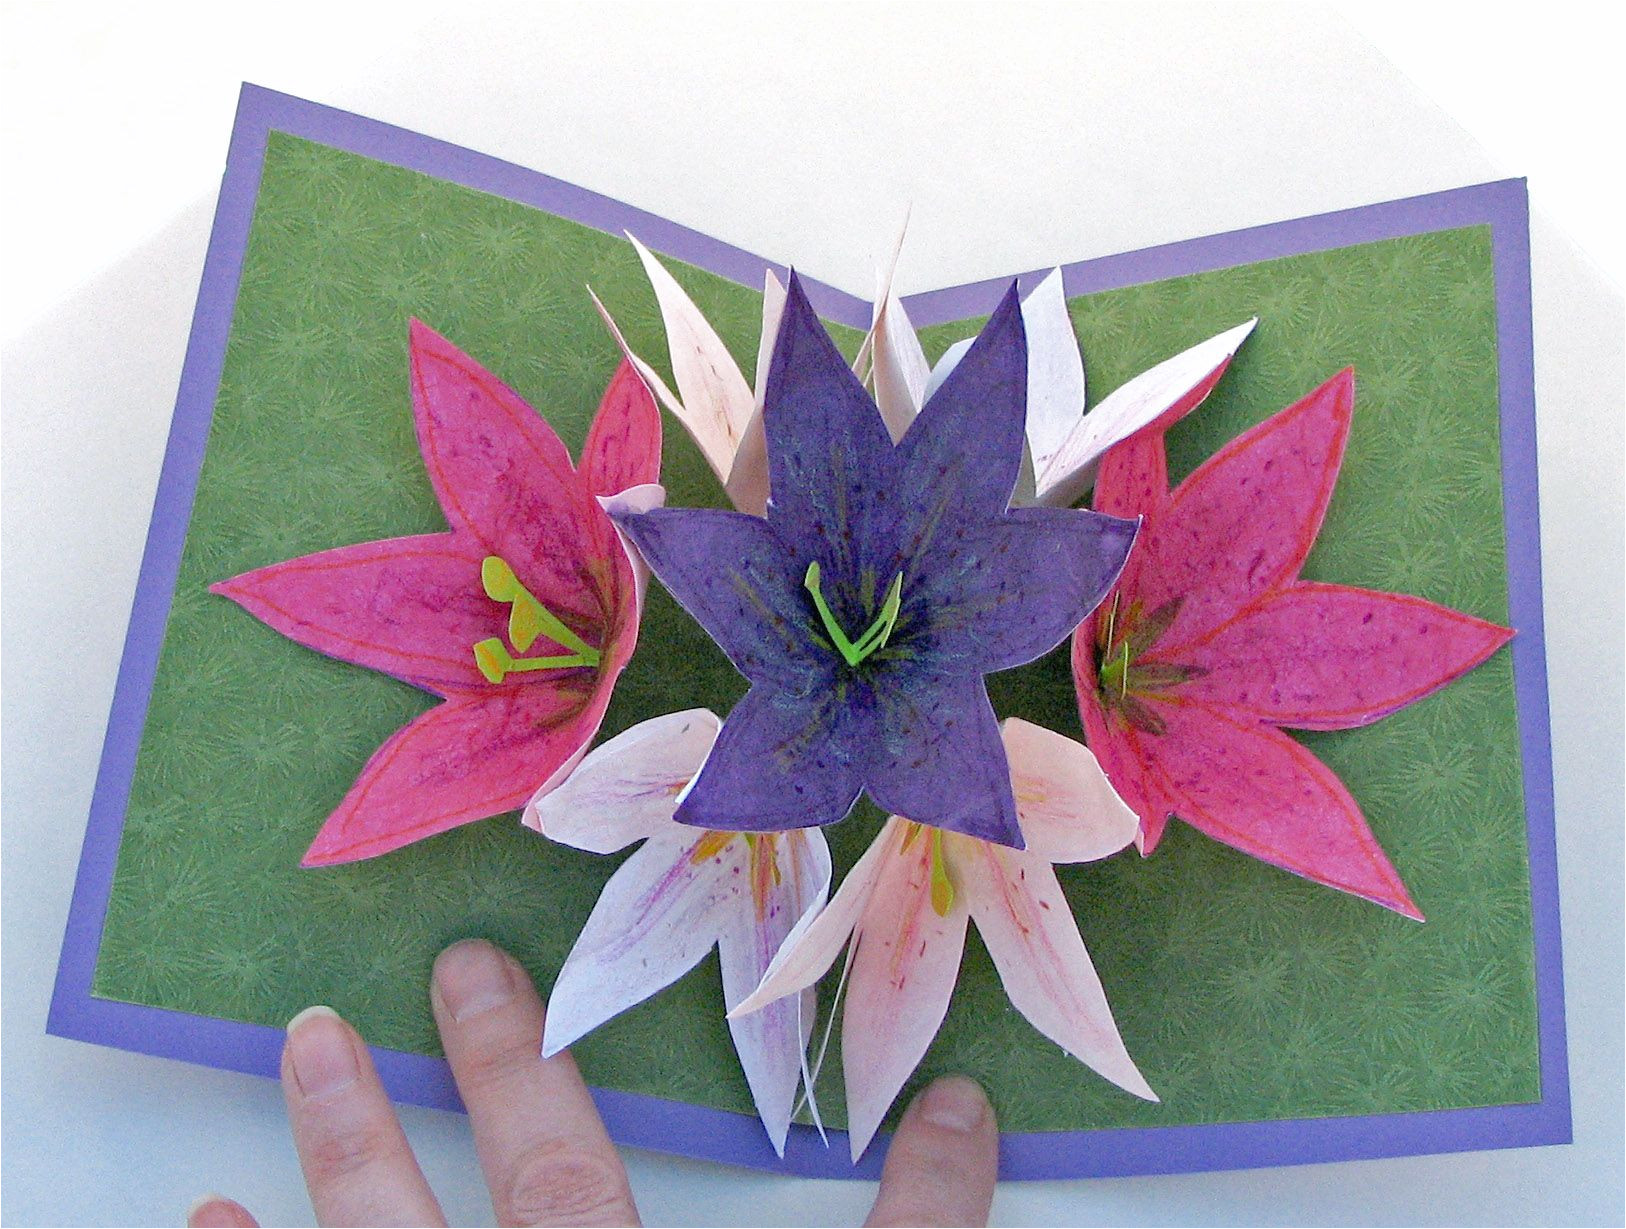 Flower Envelope Card Tutorial Step by Step Browse by Date Pop Up Flower Cards Simple Cards Handmade